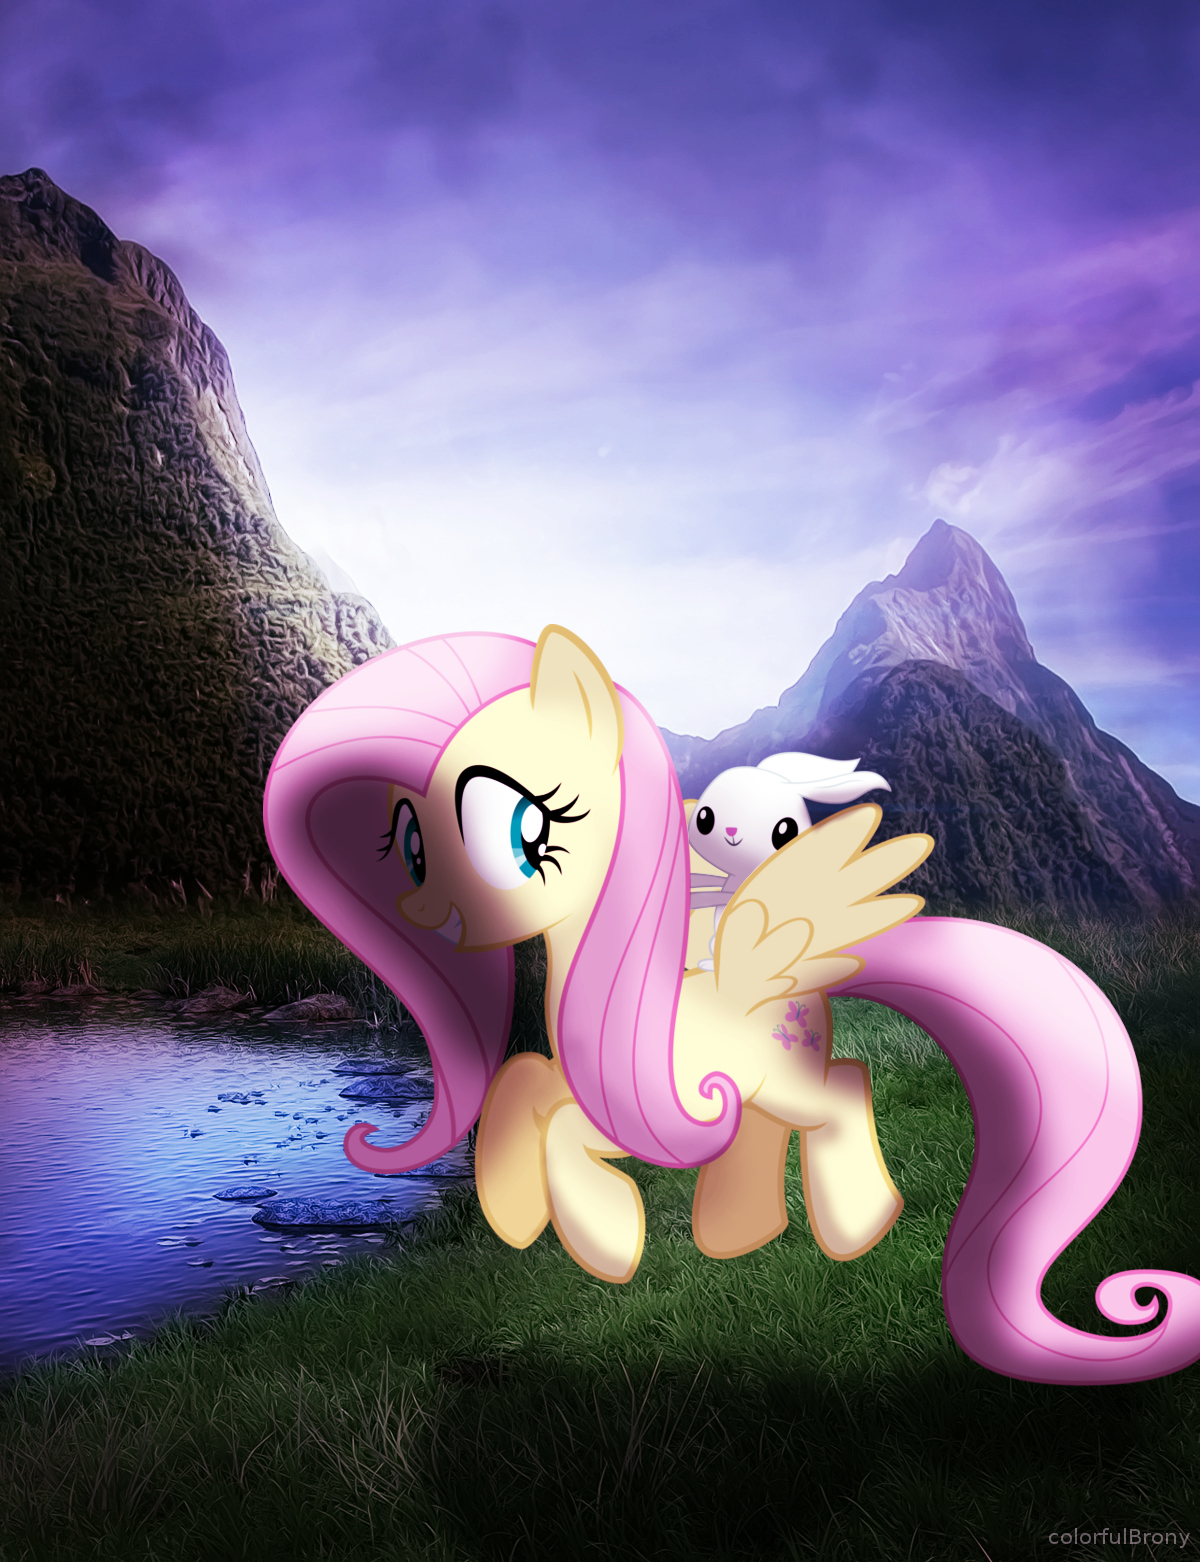 Fluttershy in the Nature [PIRL]